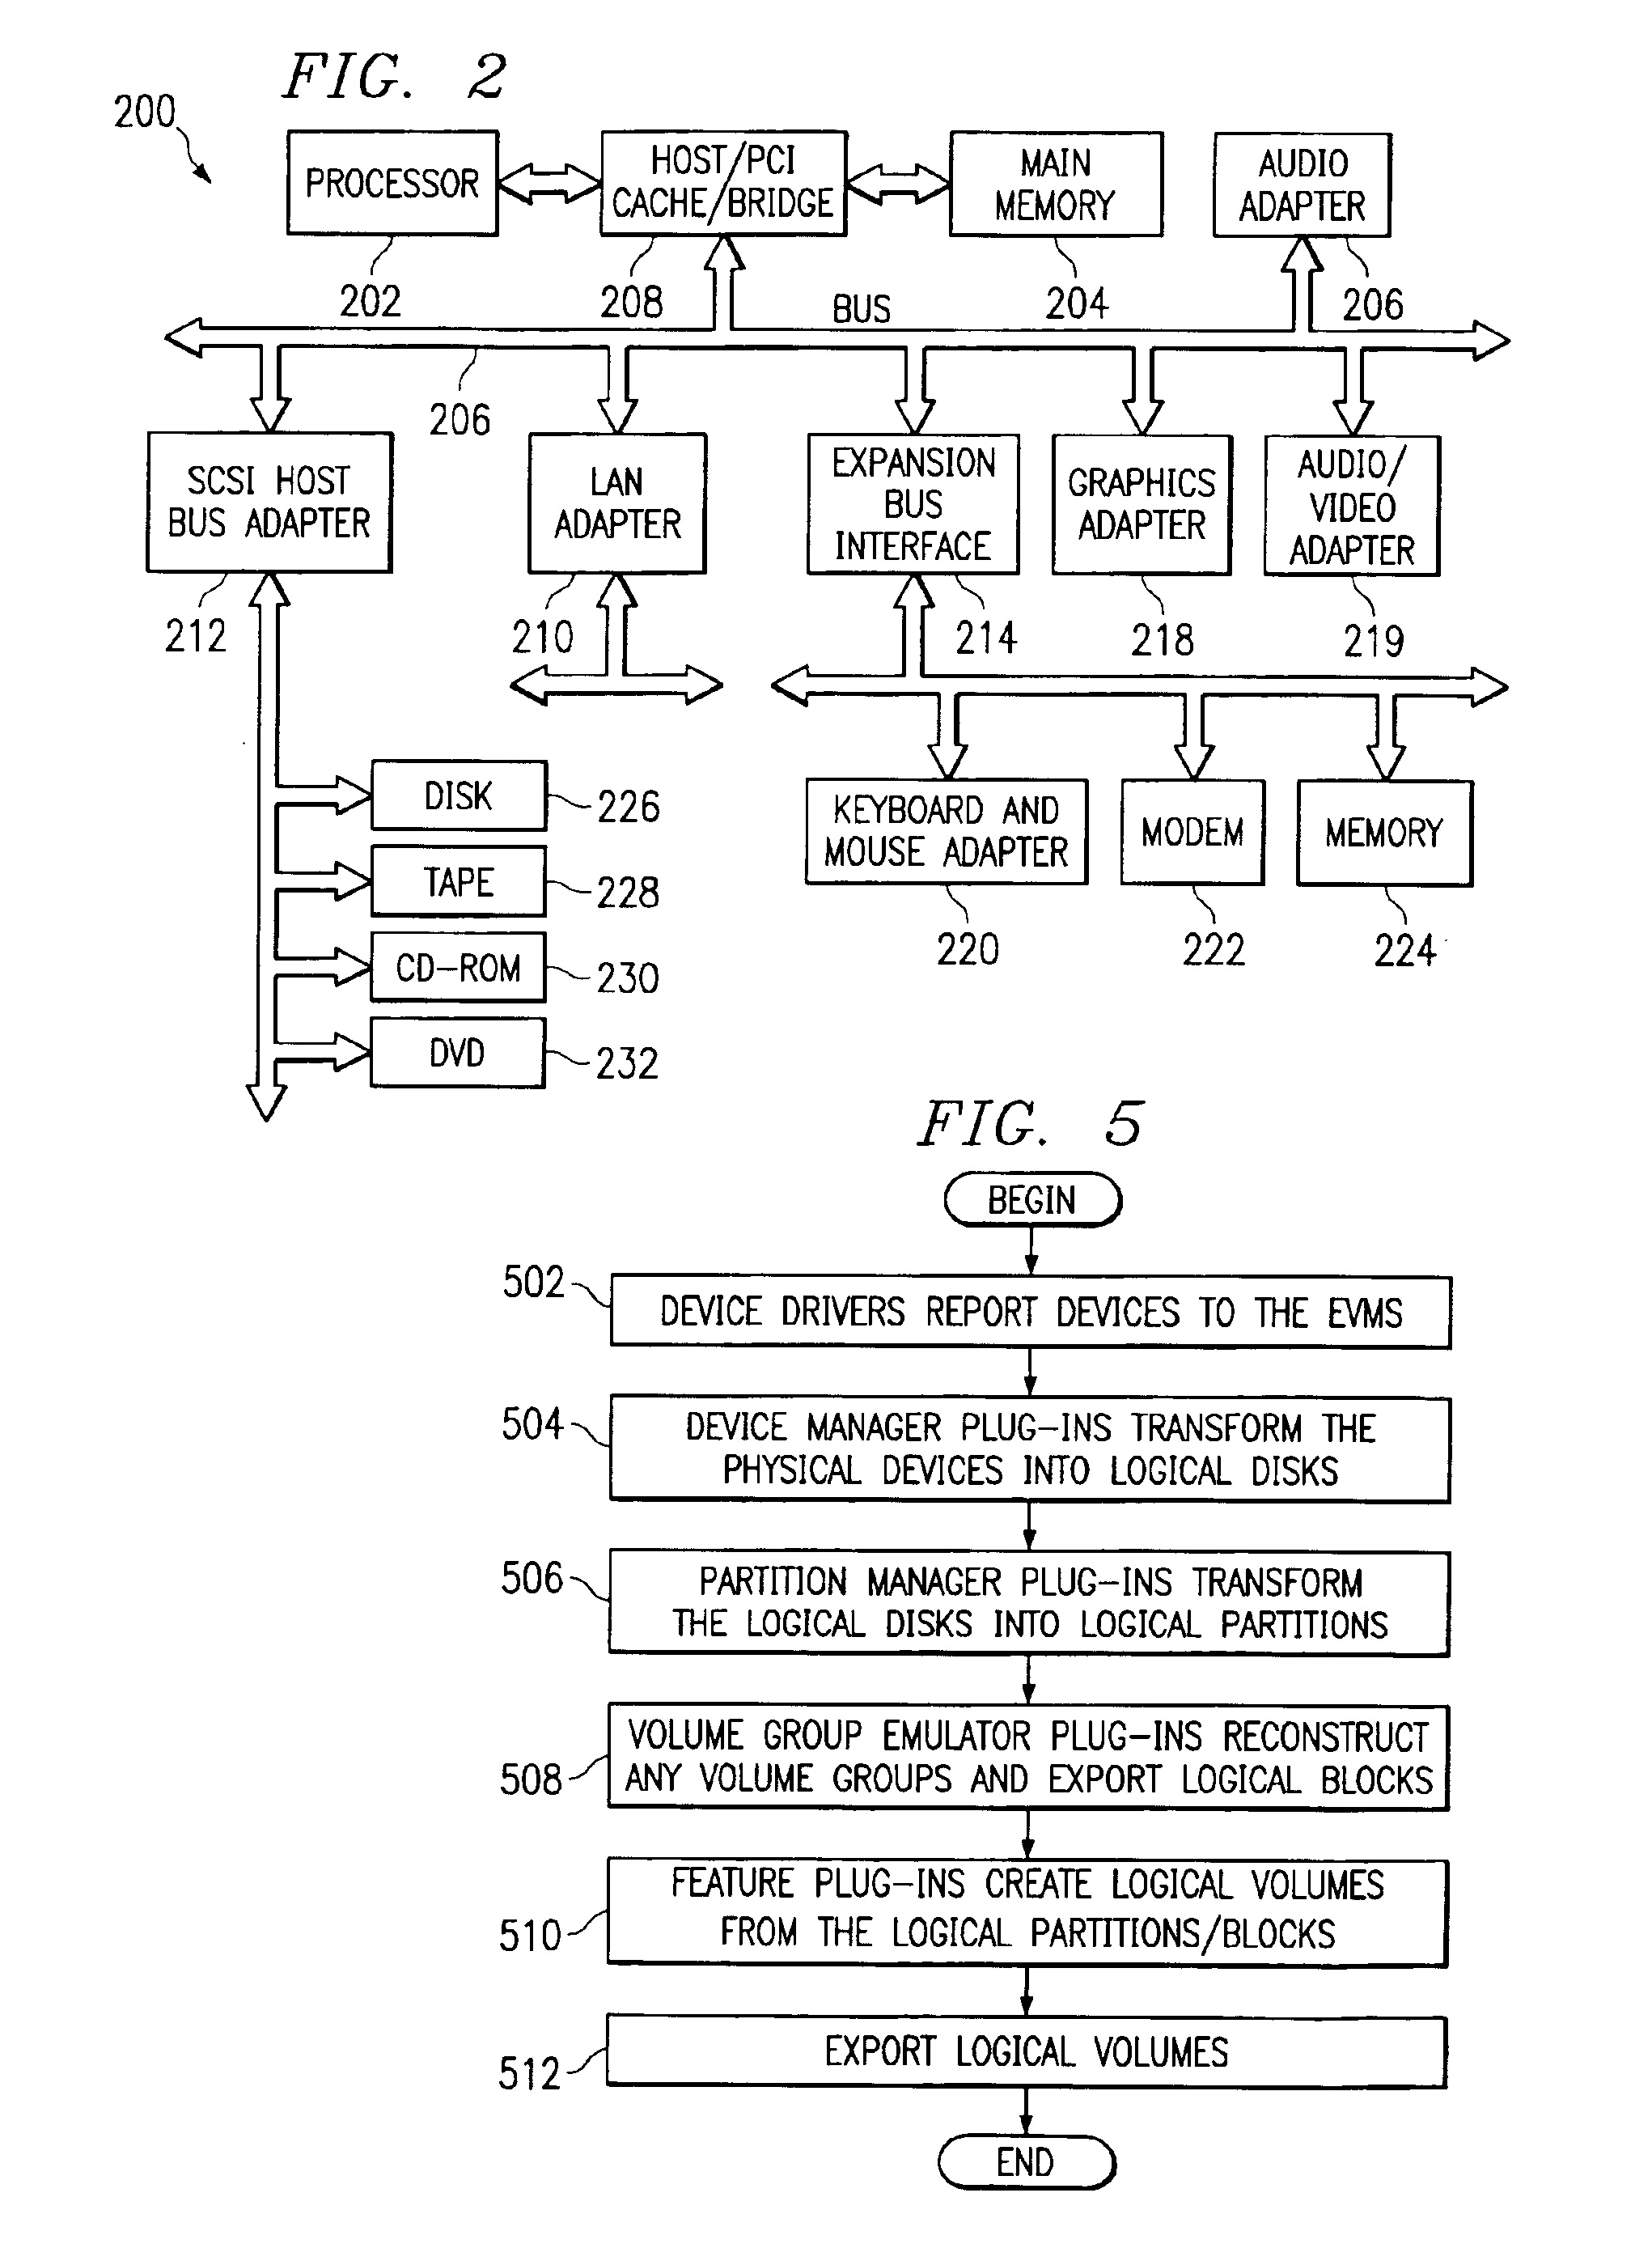 Method and an apparatus to extend the logic volume manager model to allow device management plug-ins